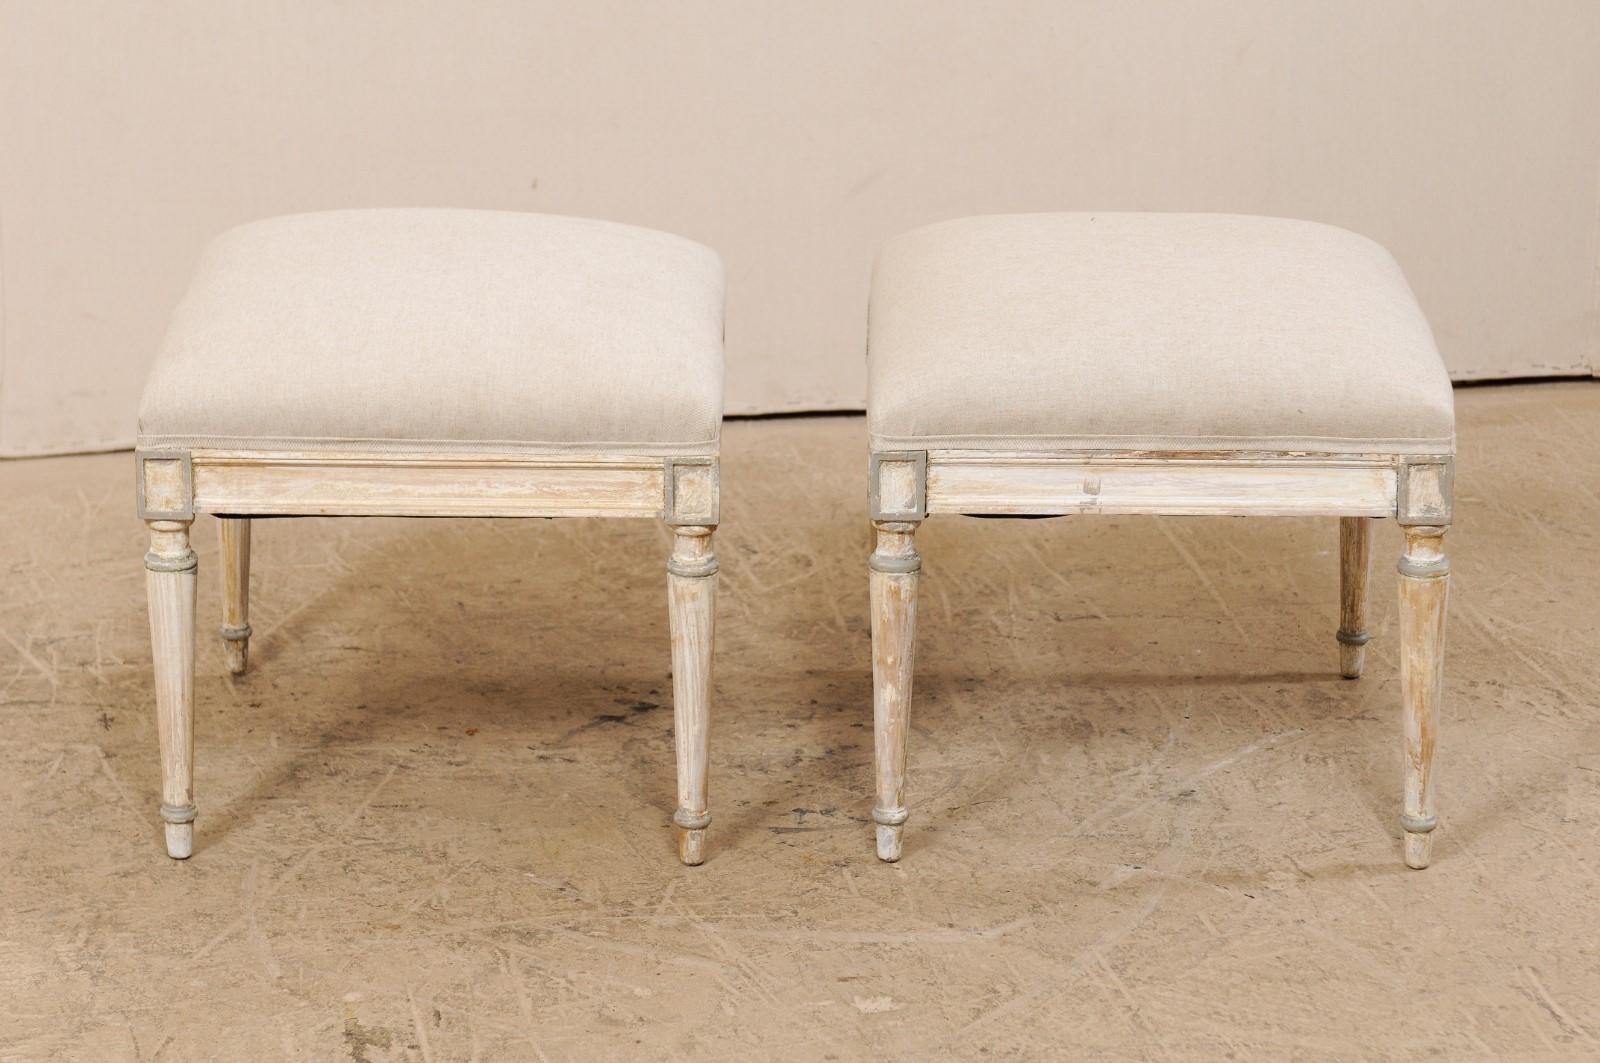 Pair of French Painted Wood Stools, circa 1920s (Holz)